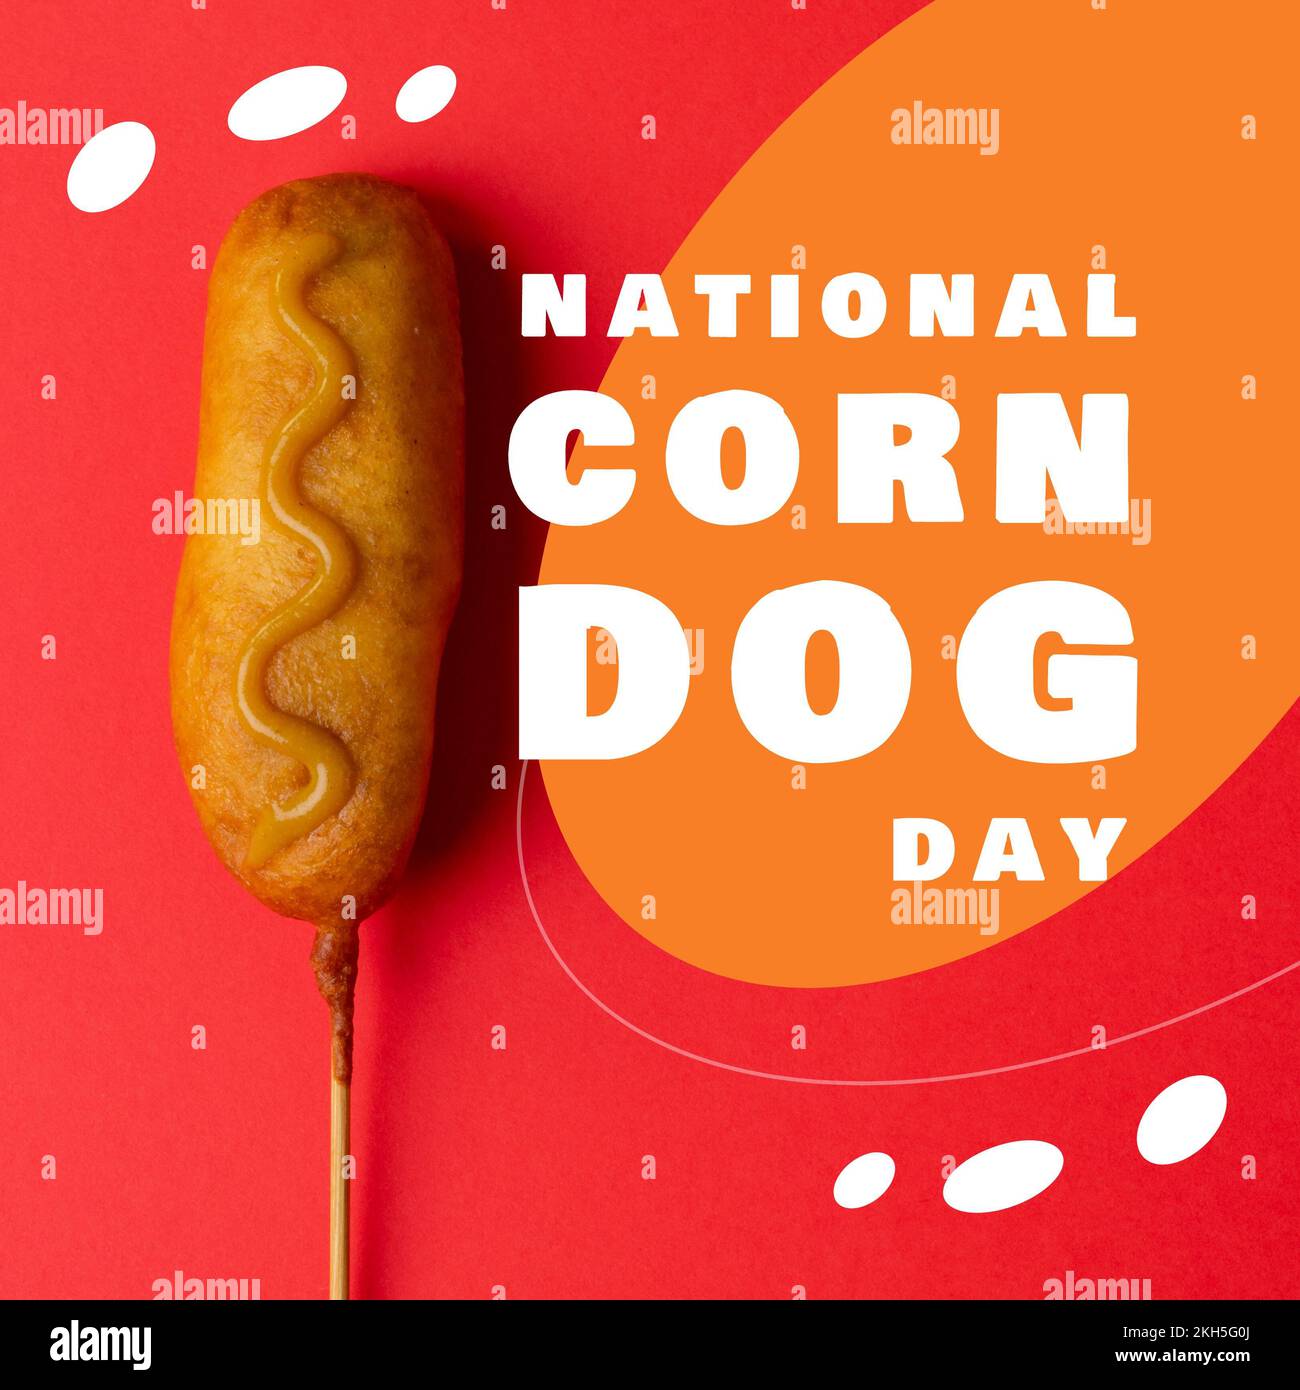 Composition of national corn dog day text over corn dog on red and orange background Stock Photo